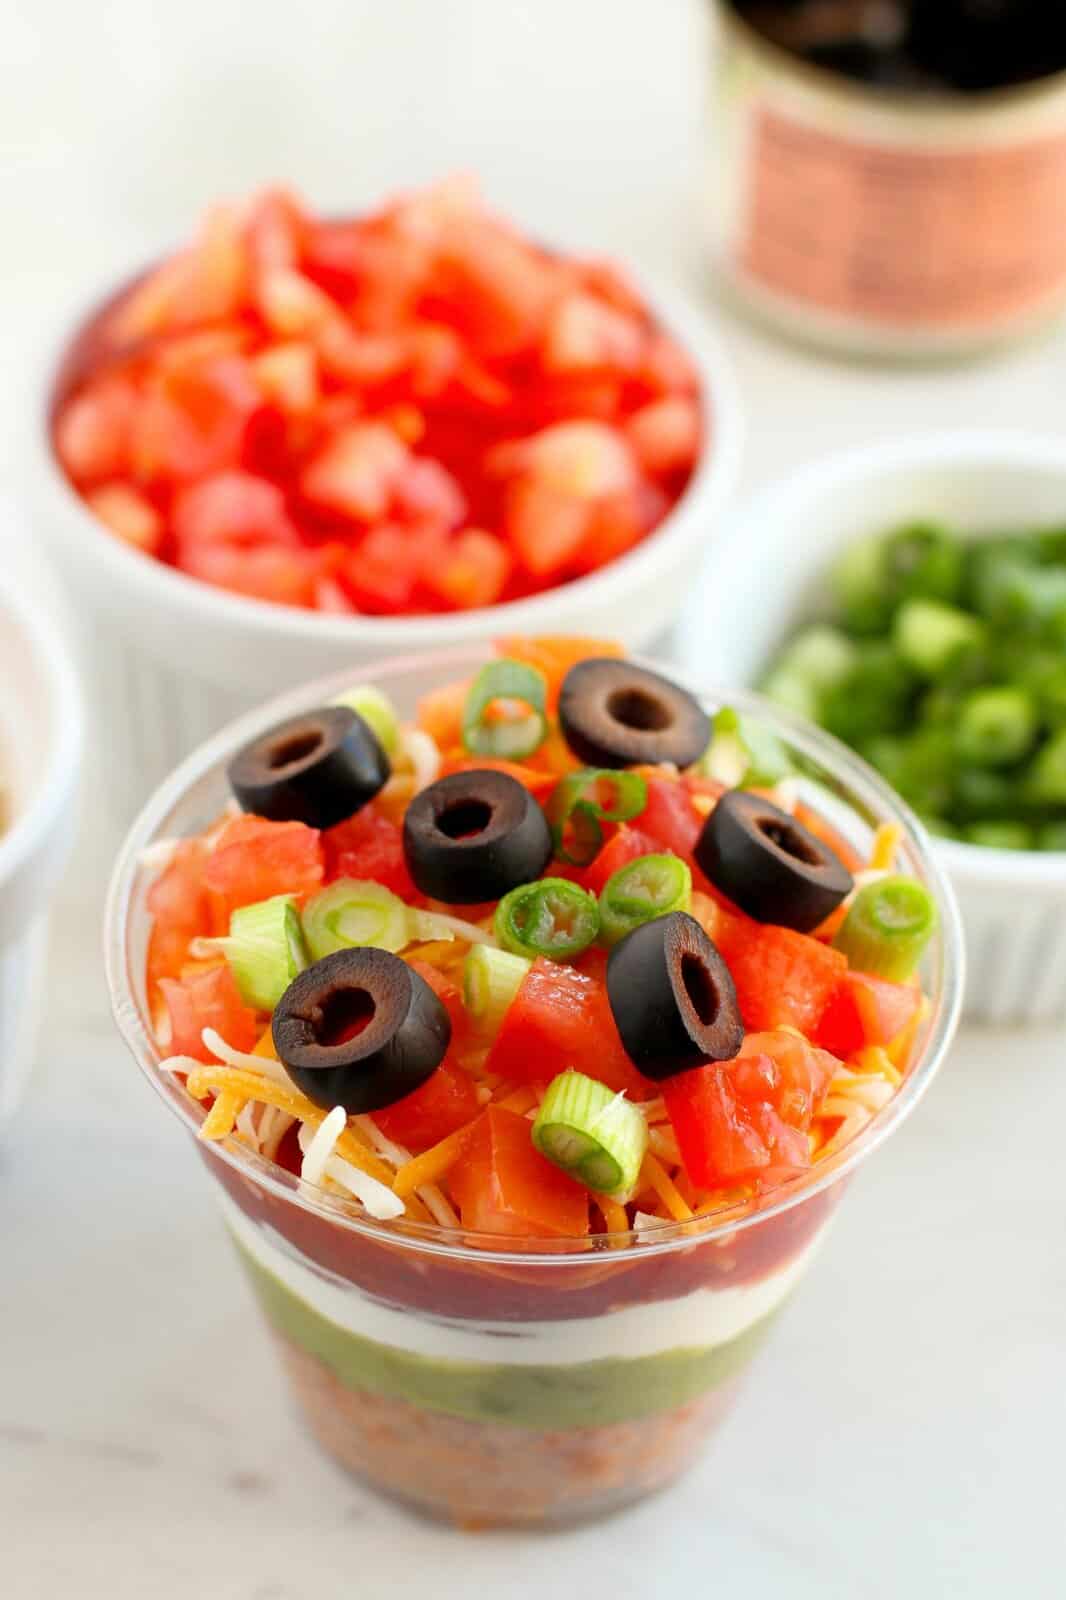 Looking down on the top few layers of the 7 layer dip in a cup.